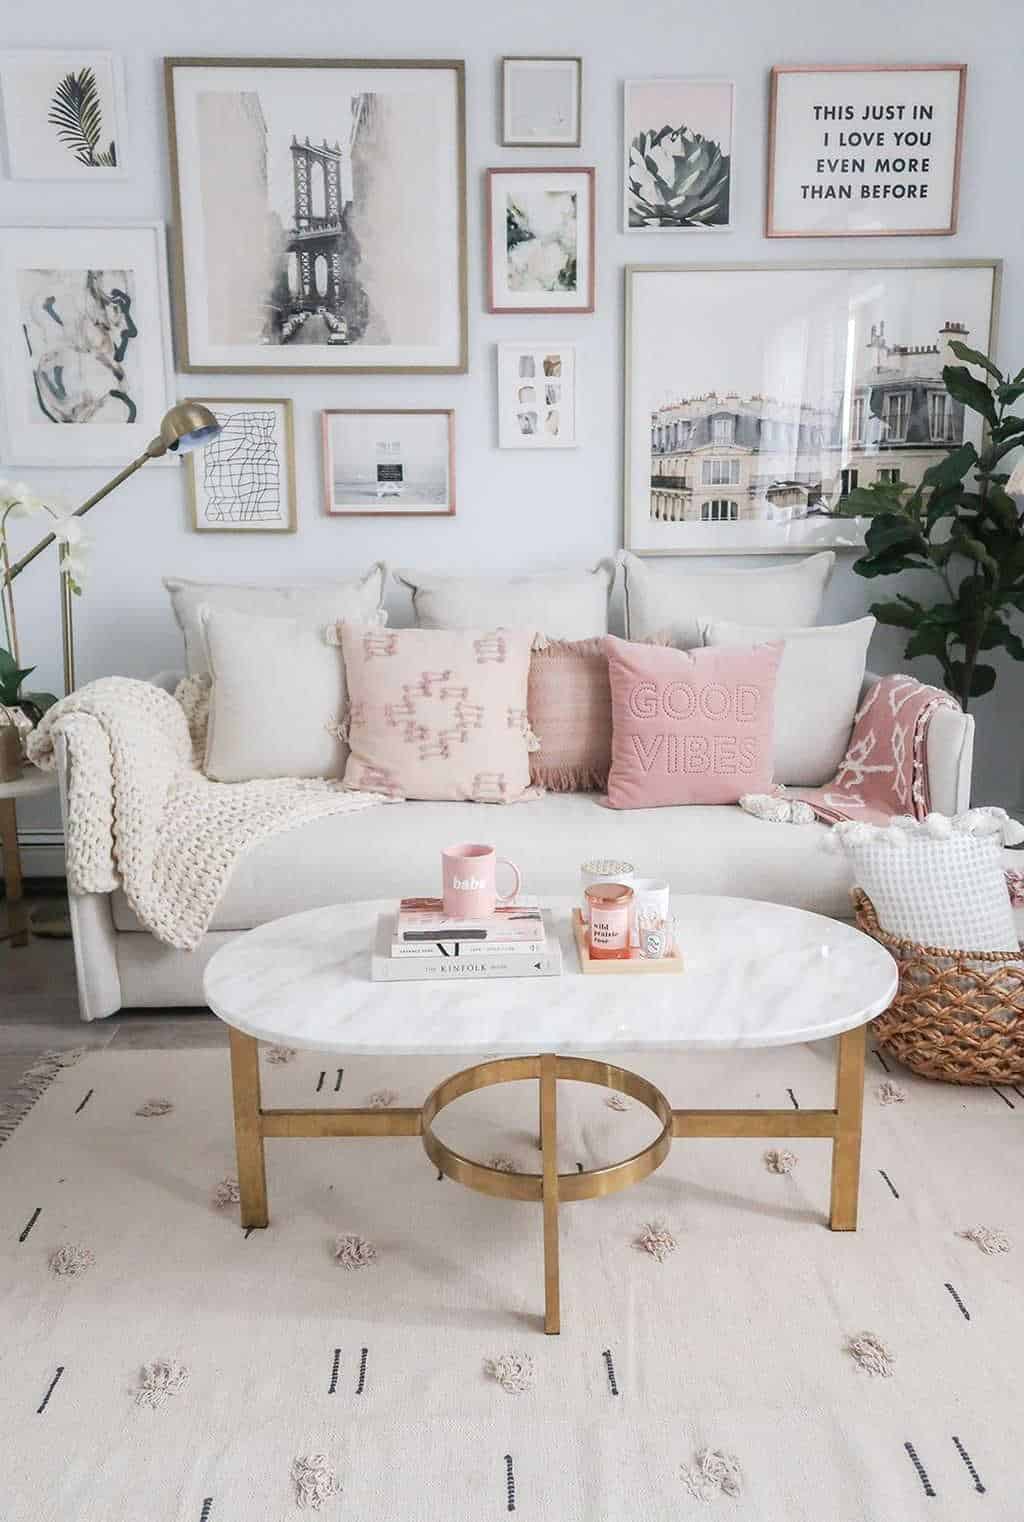 25 Adorable Shabby Chic Living Room Ideas You'll Love